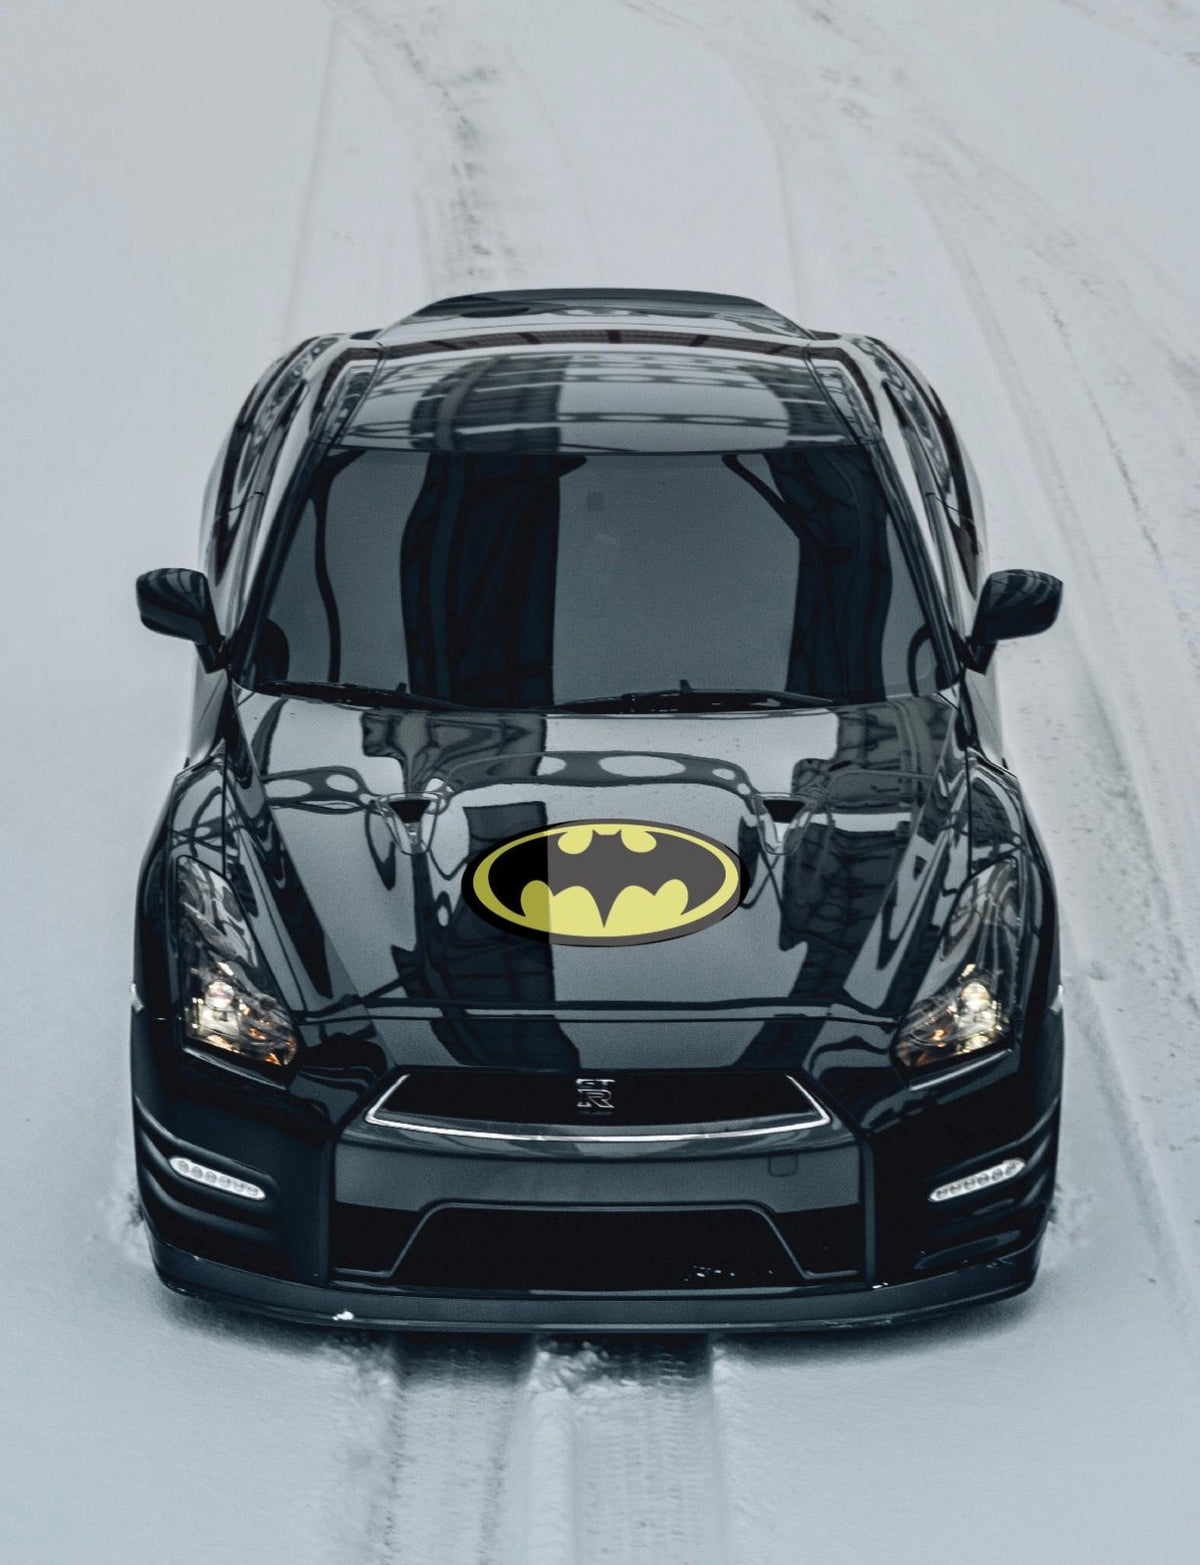 A black car with a Cover-Alls Bat superhero symbol logo on the hood, driving on a snowy road.